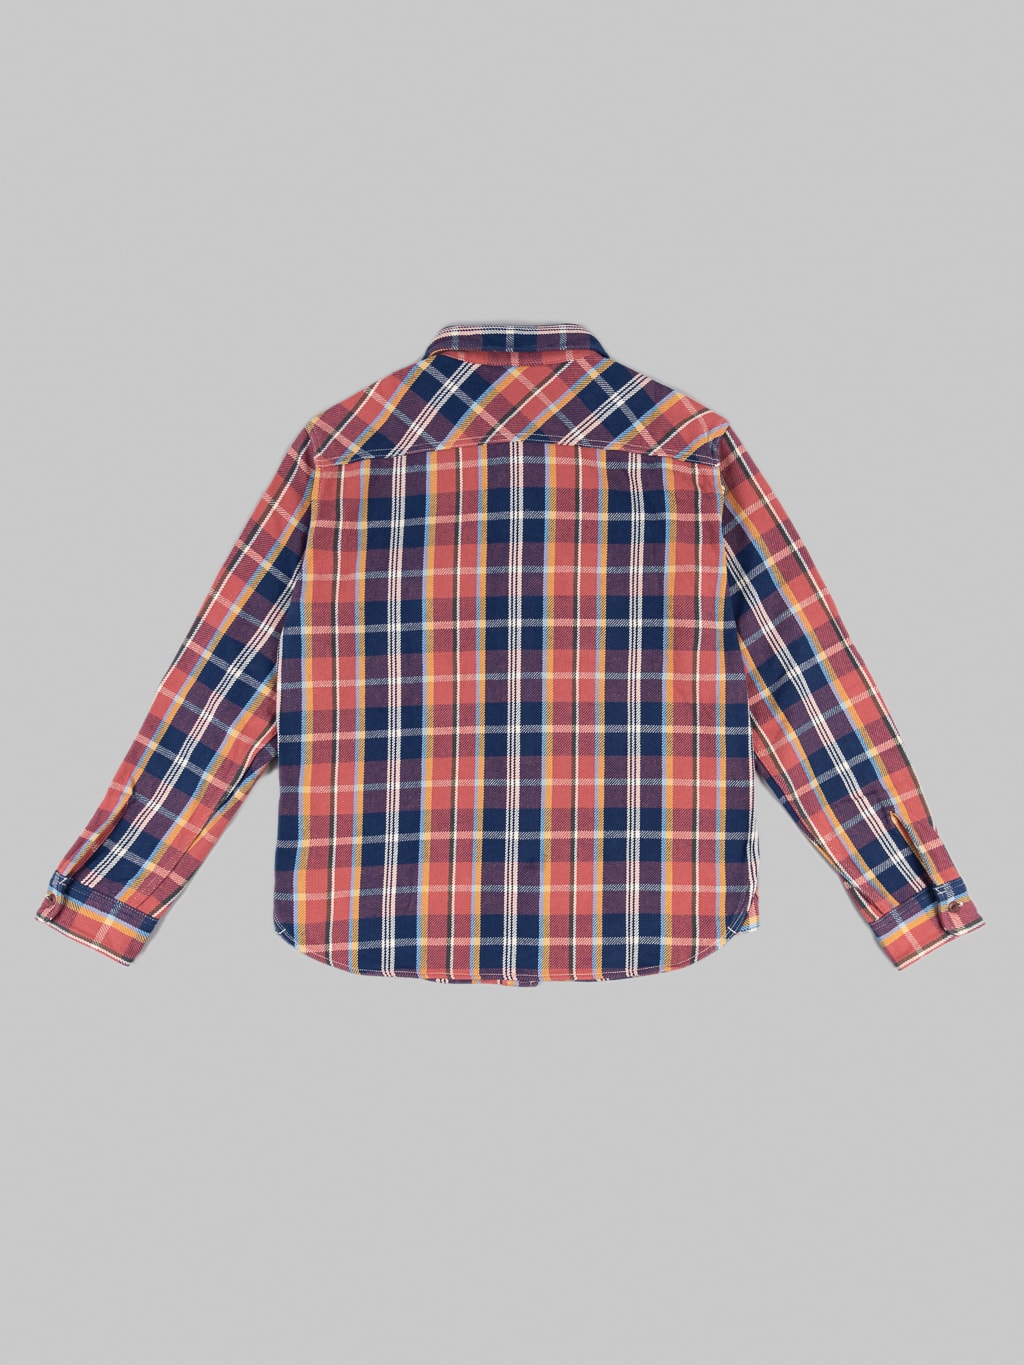 UES Heavy selvedge Flannel Shirt pink navy back